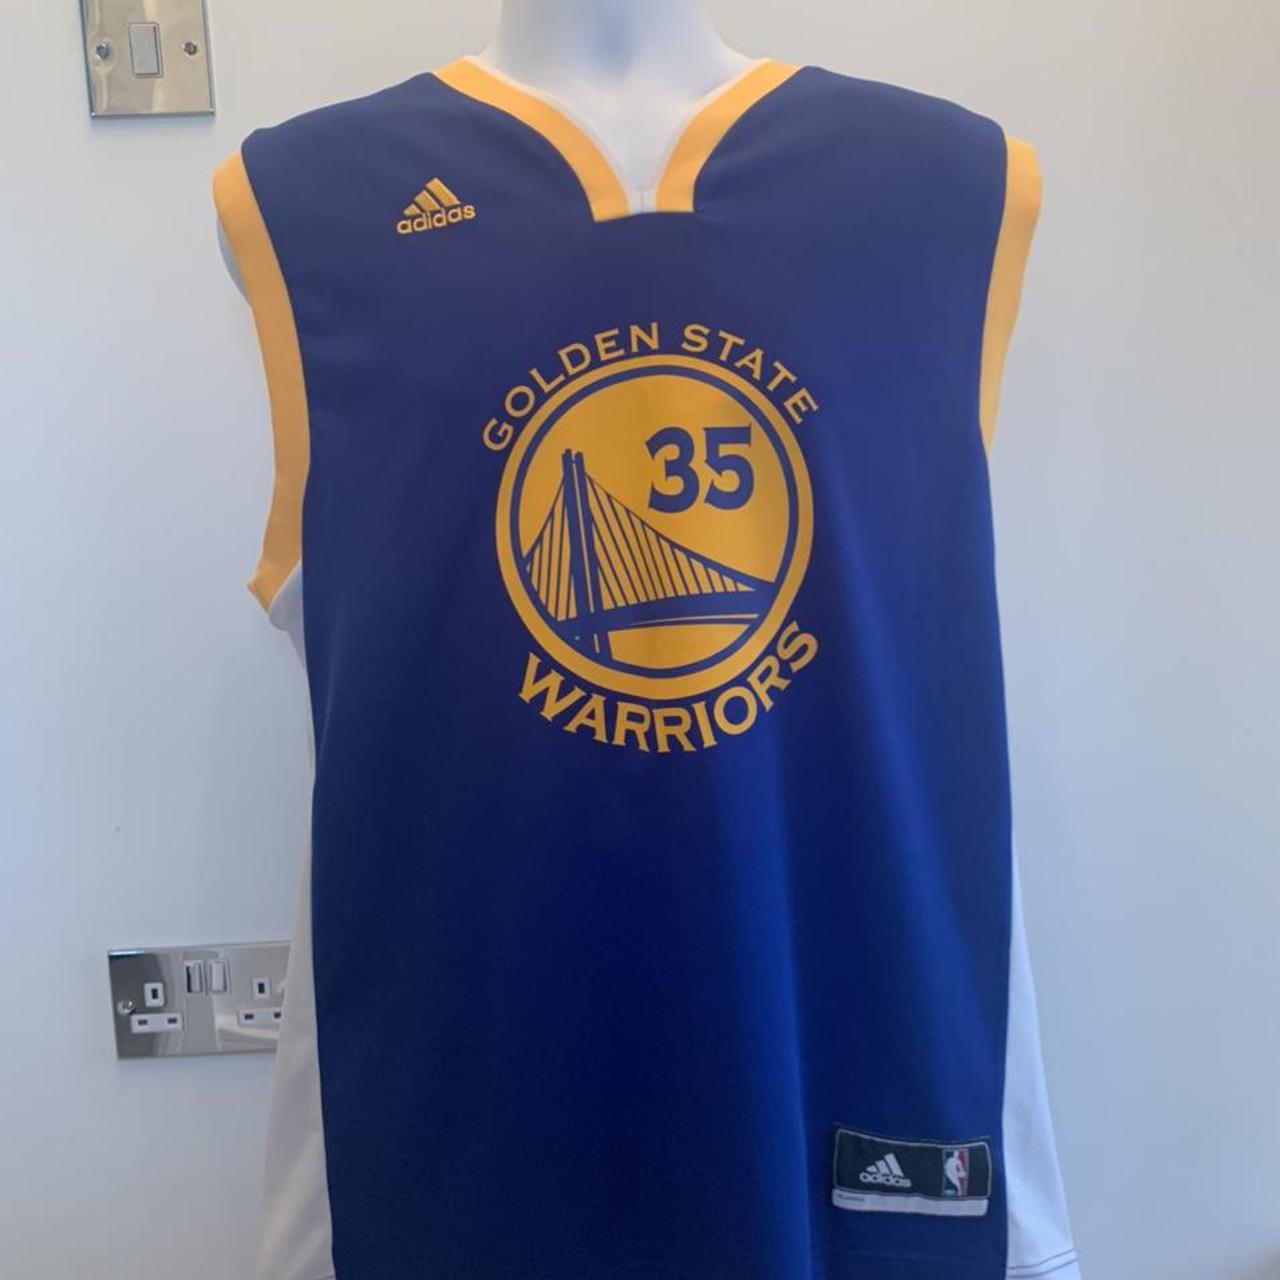 Nike Kevin Durant Golden State Warriors The Town - Depop